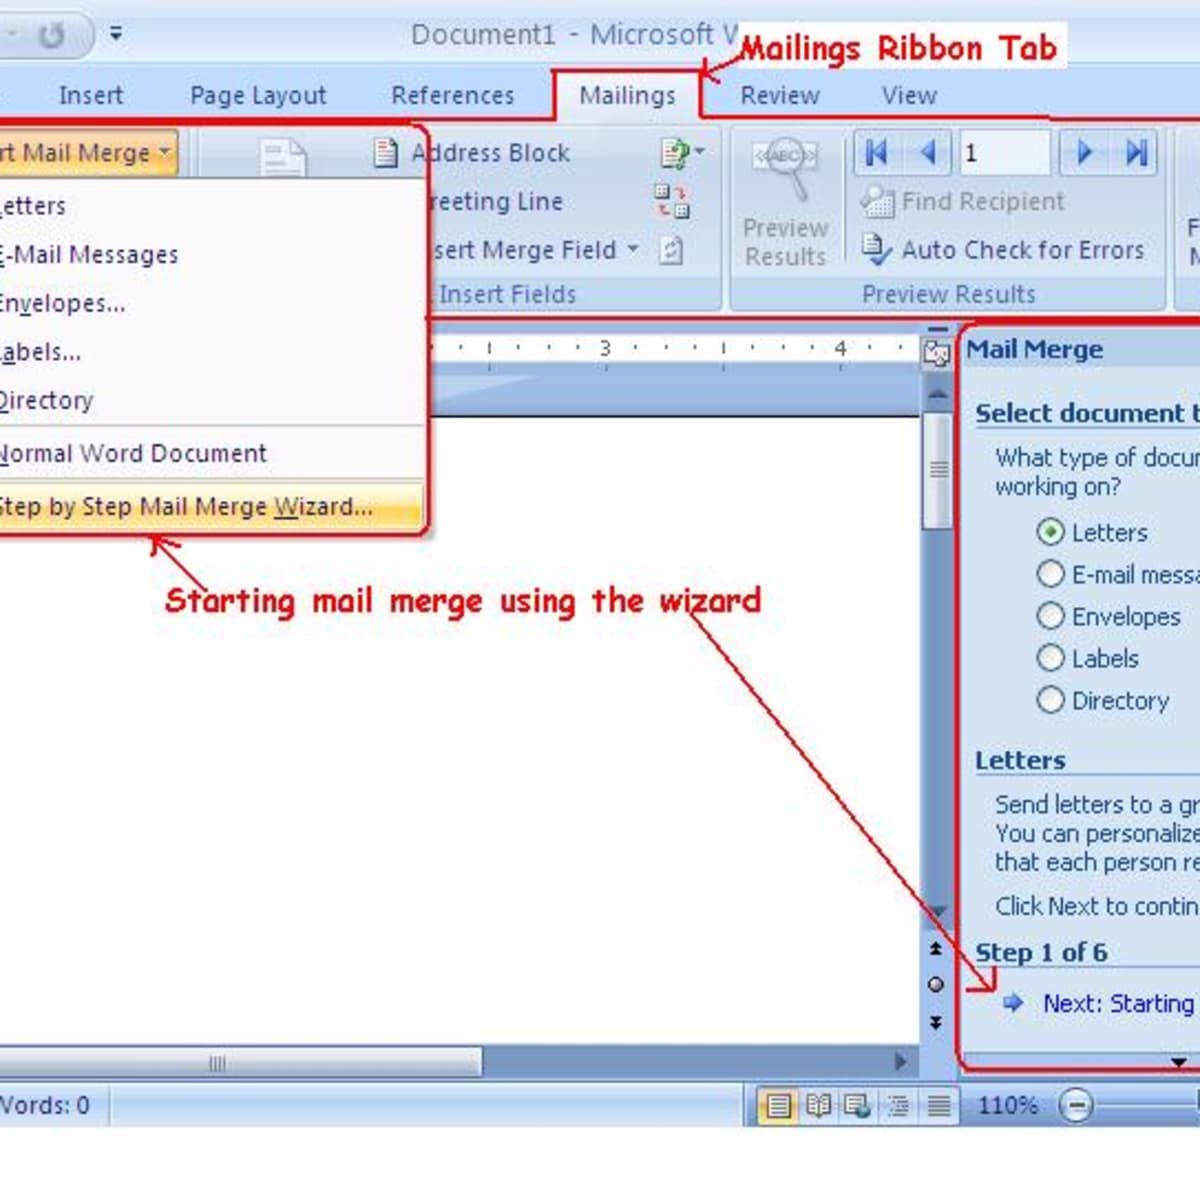 Step by Step Guide on Using Mail Merge Wizard in Word 2007 - HubPages